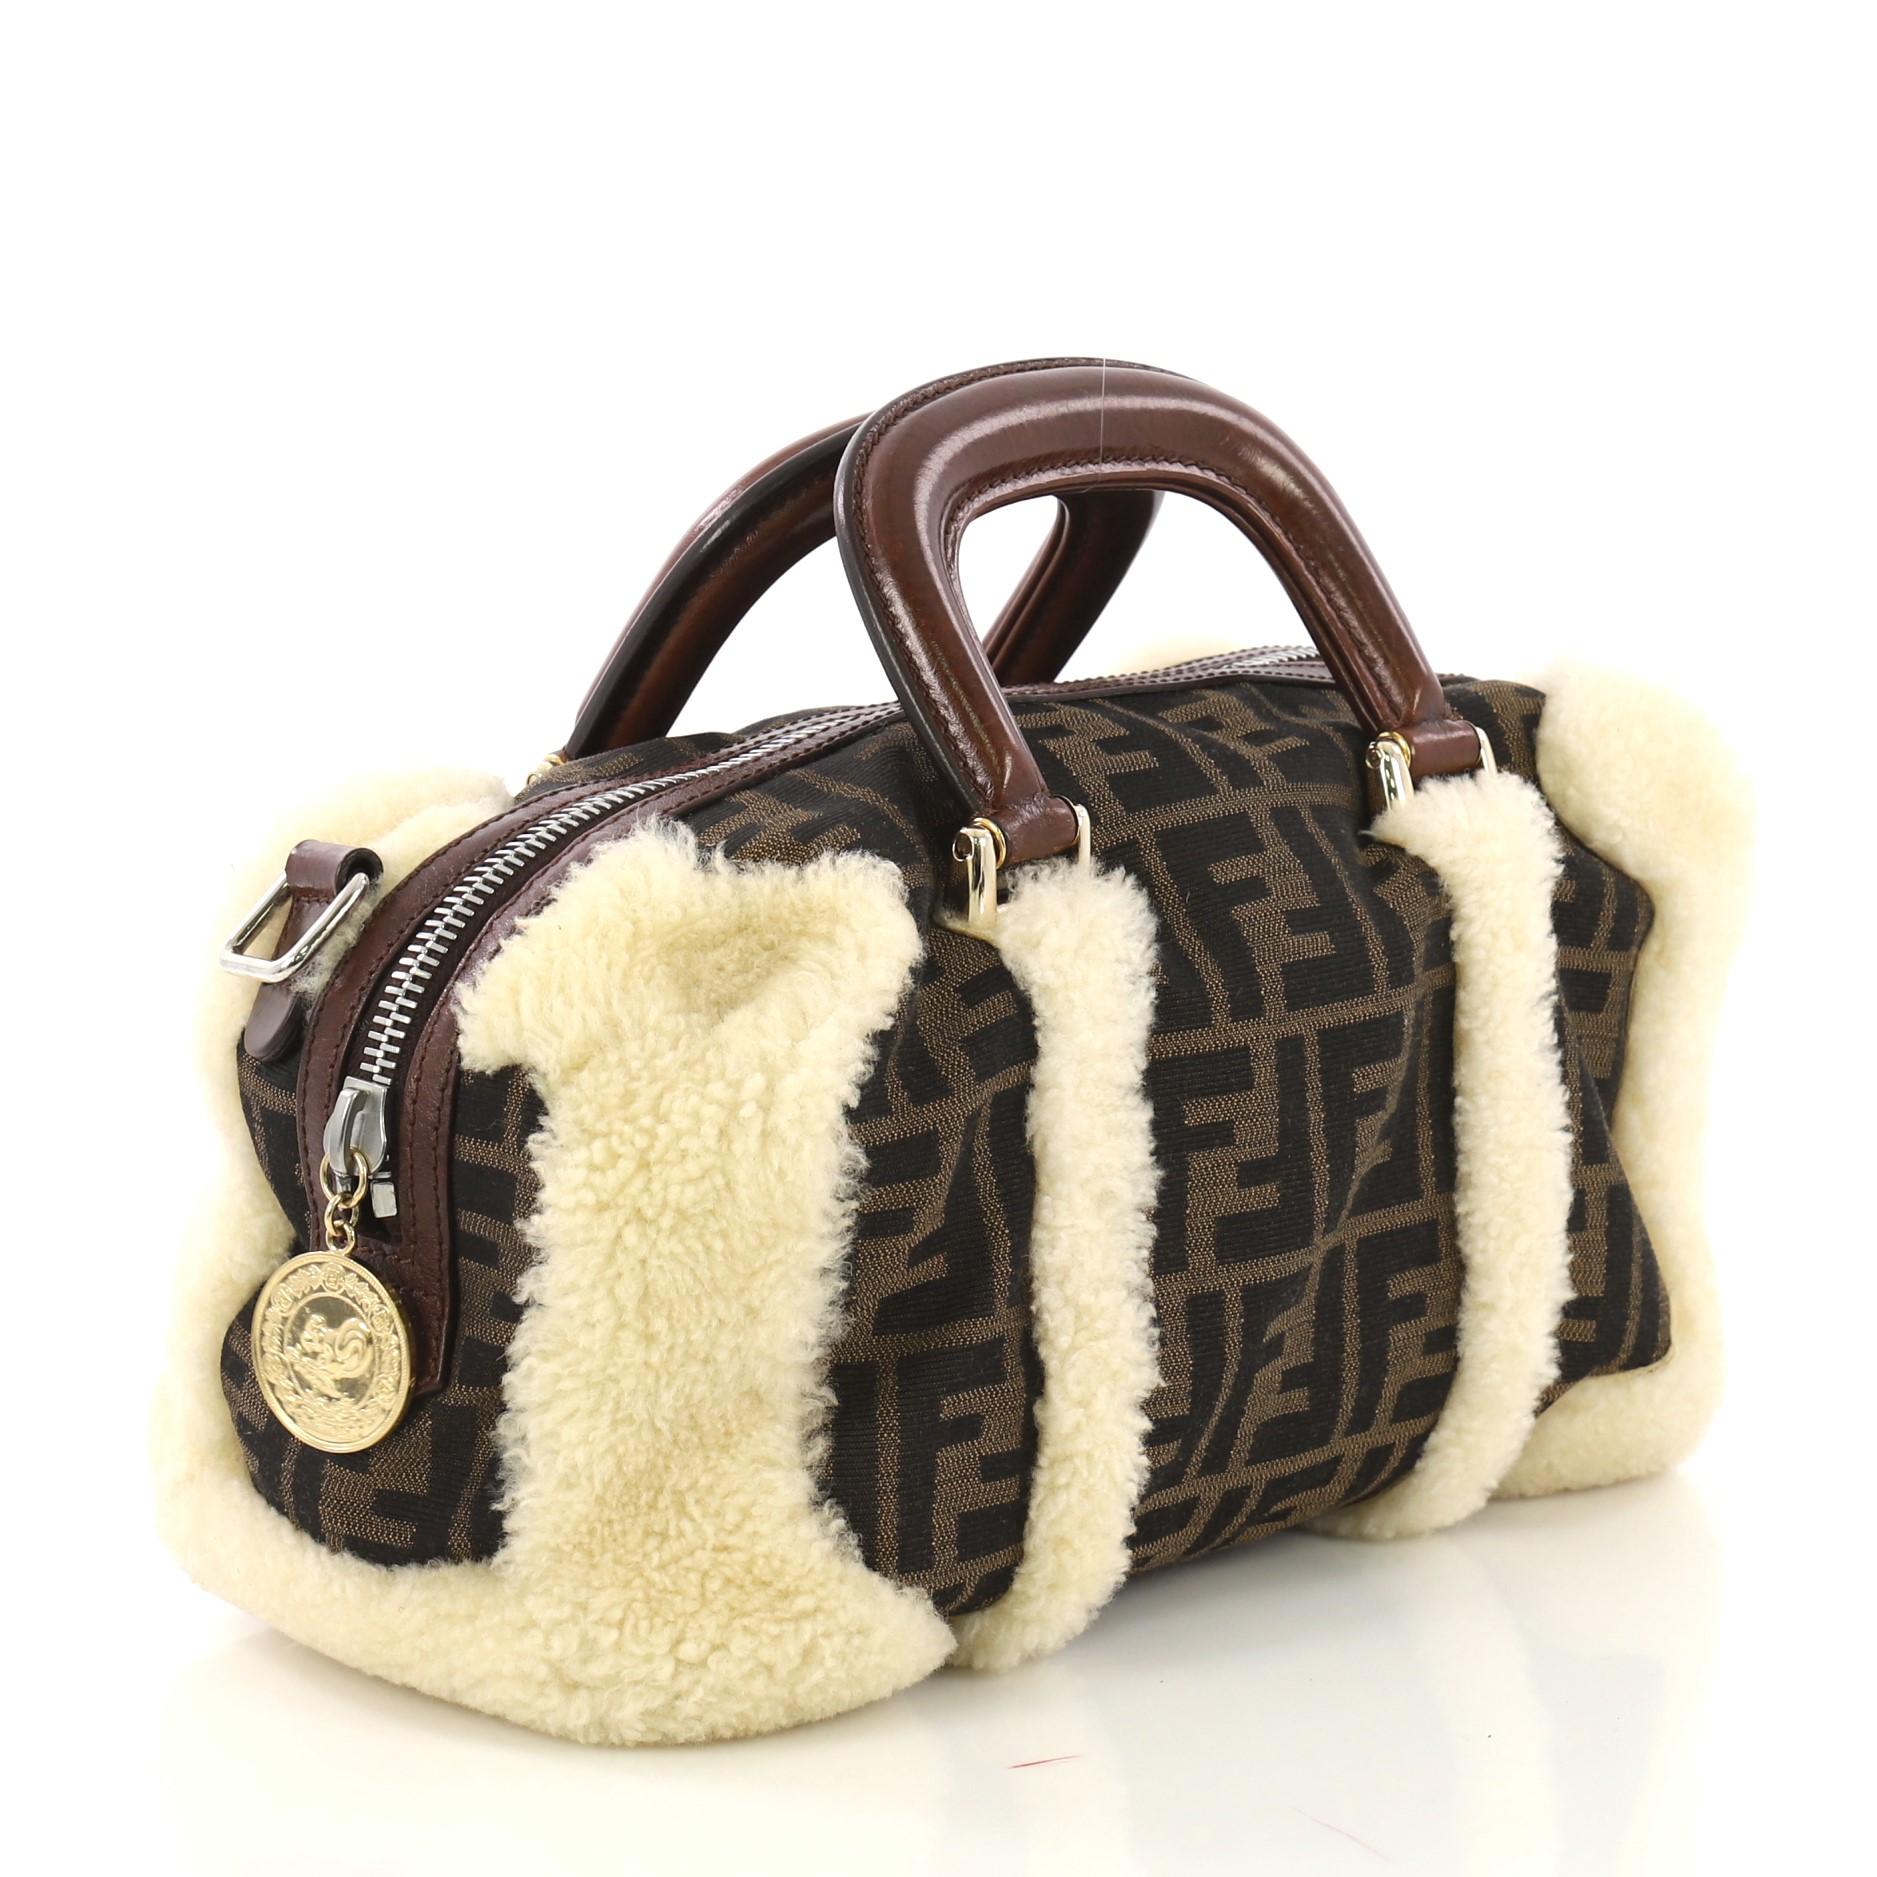 This Fendi Vintage Convertible Boston Bag Zucca Canvas and Shearling Medium, crafted in brown zucca canvas and shearling, features dual leather handles and gold and silver-tone hardware. Its zip closure opens to a brown fabric interior. 

Condition: